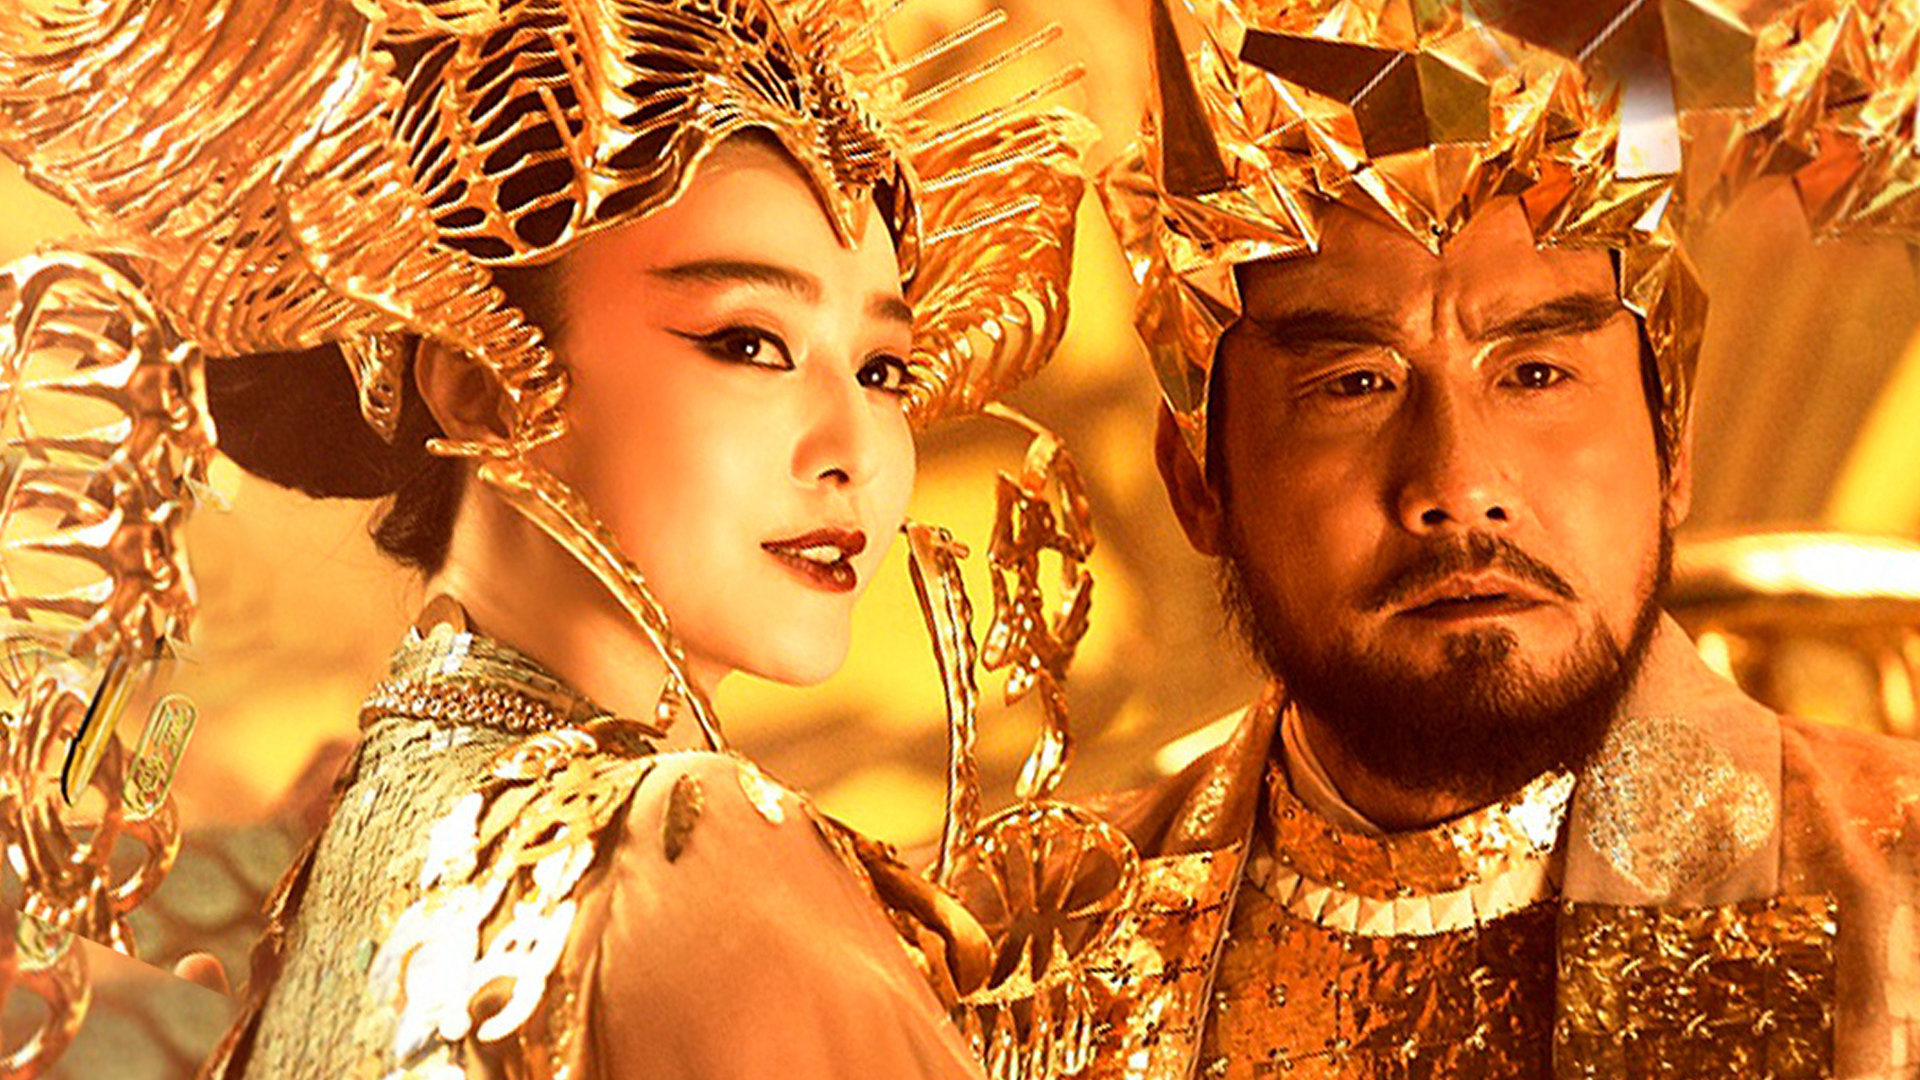 [Mainland Chinese Movie 2015] Lady of the Dynasty 王朝的女人·楊貴妃 - Mainland China - Soompi Forums